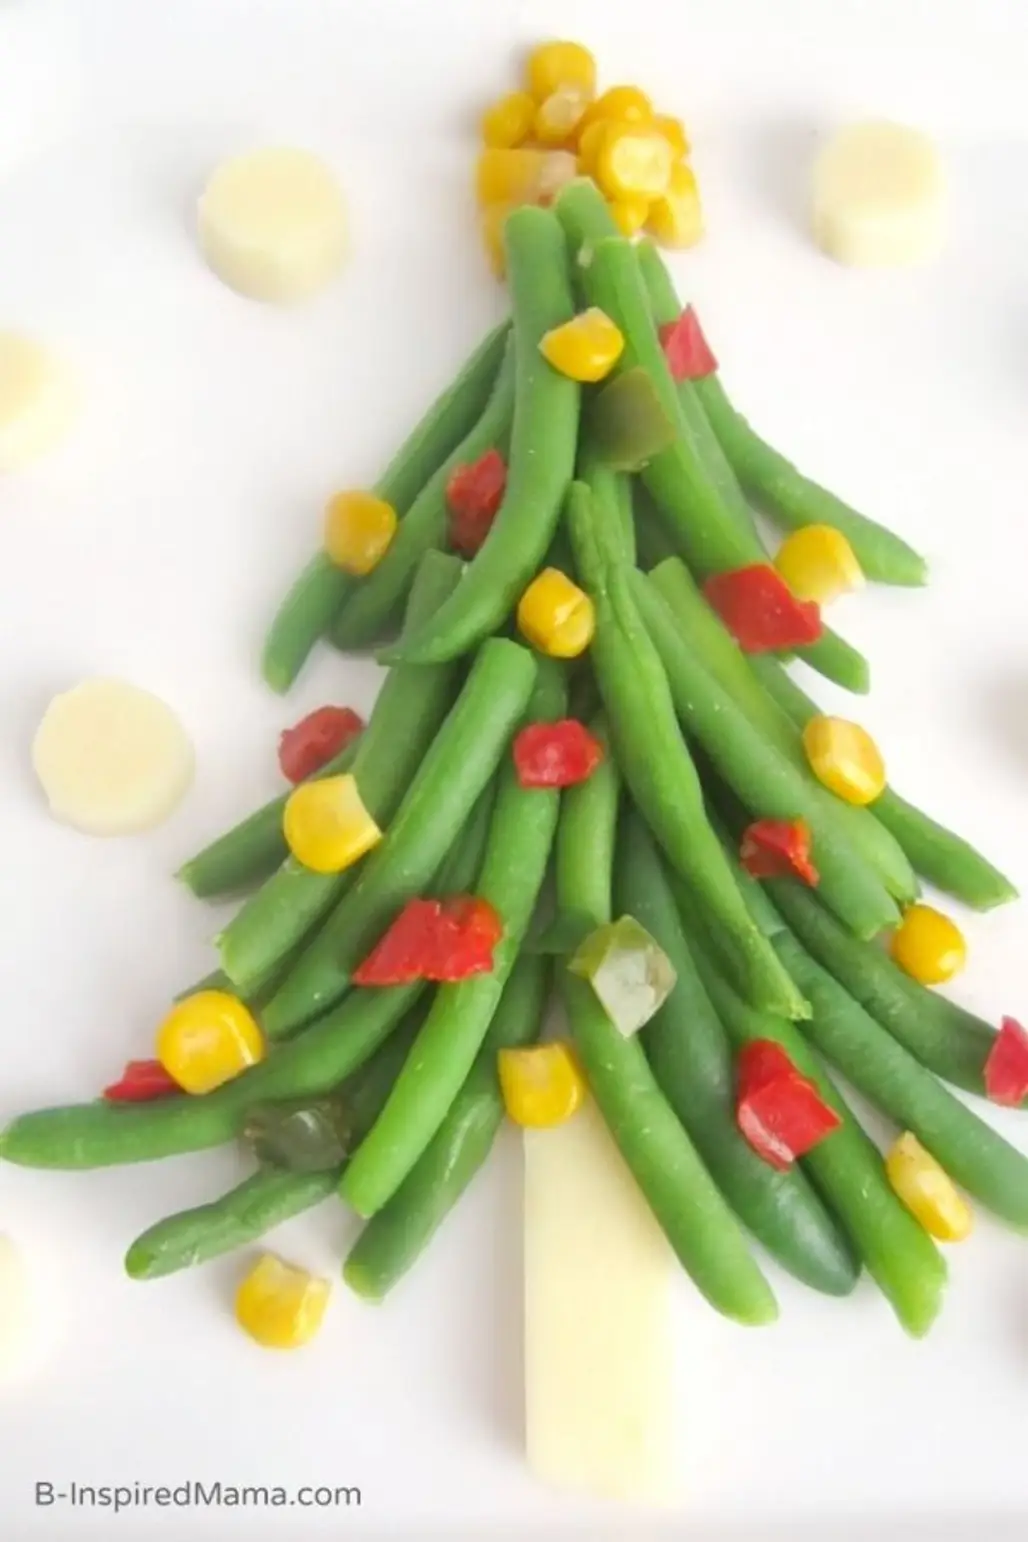 A Christmas Tree of Vegetables